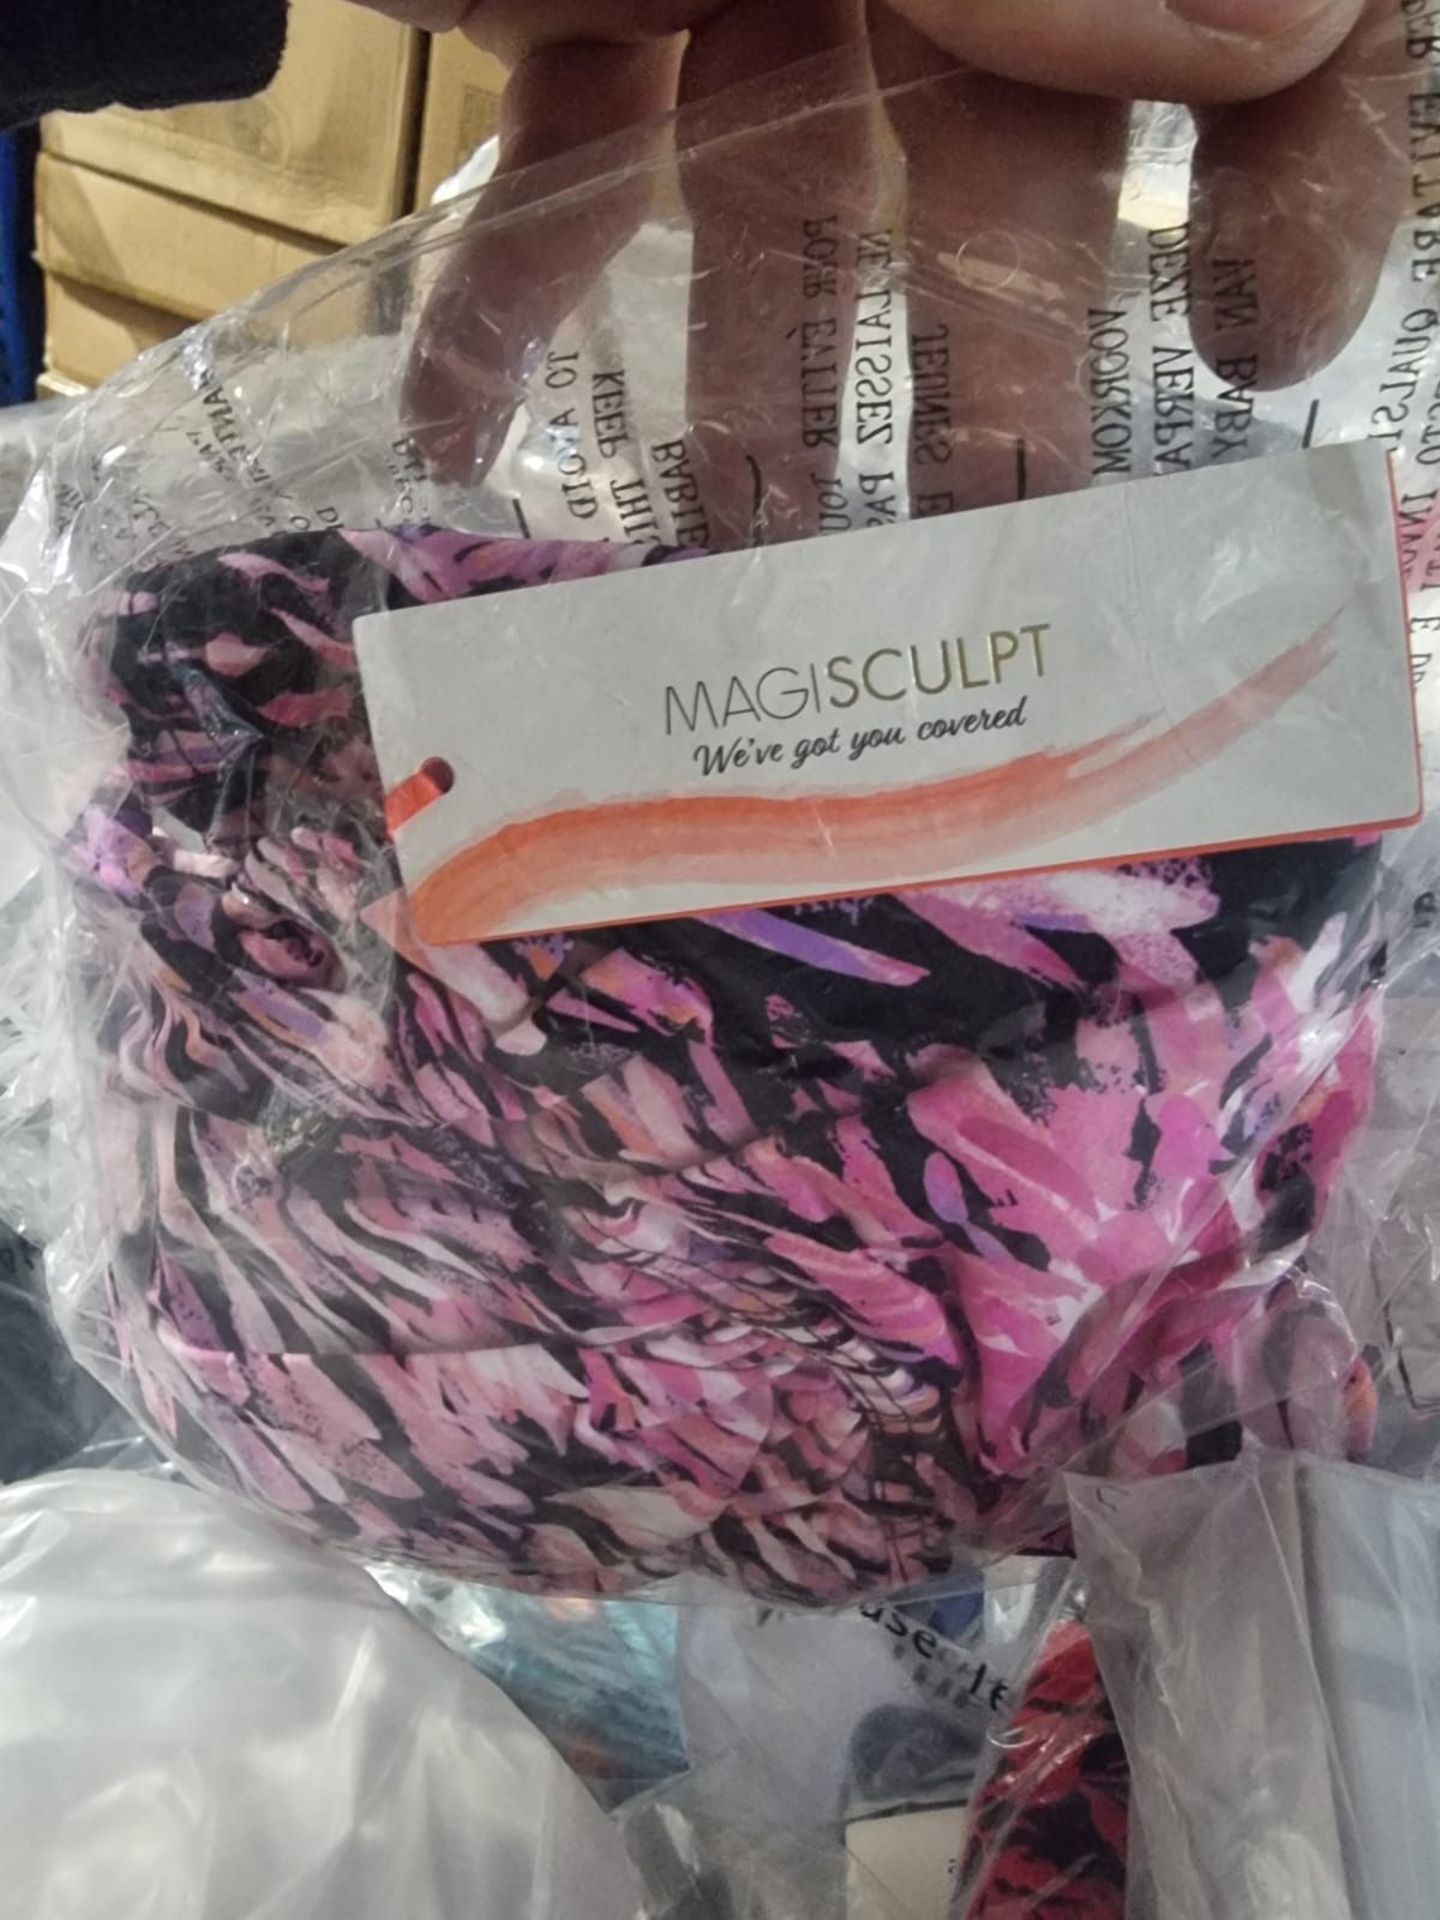 100 x NEW PACKAGED ASSORTED SWIM & UNDERWEAR FROM BRAND SUCH AS WONDERBRA, BOUX AVENUE, ANN SUMMERS, - Image 30 of 53